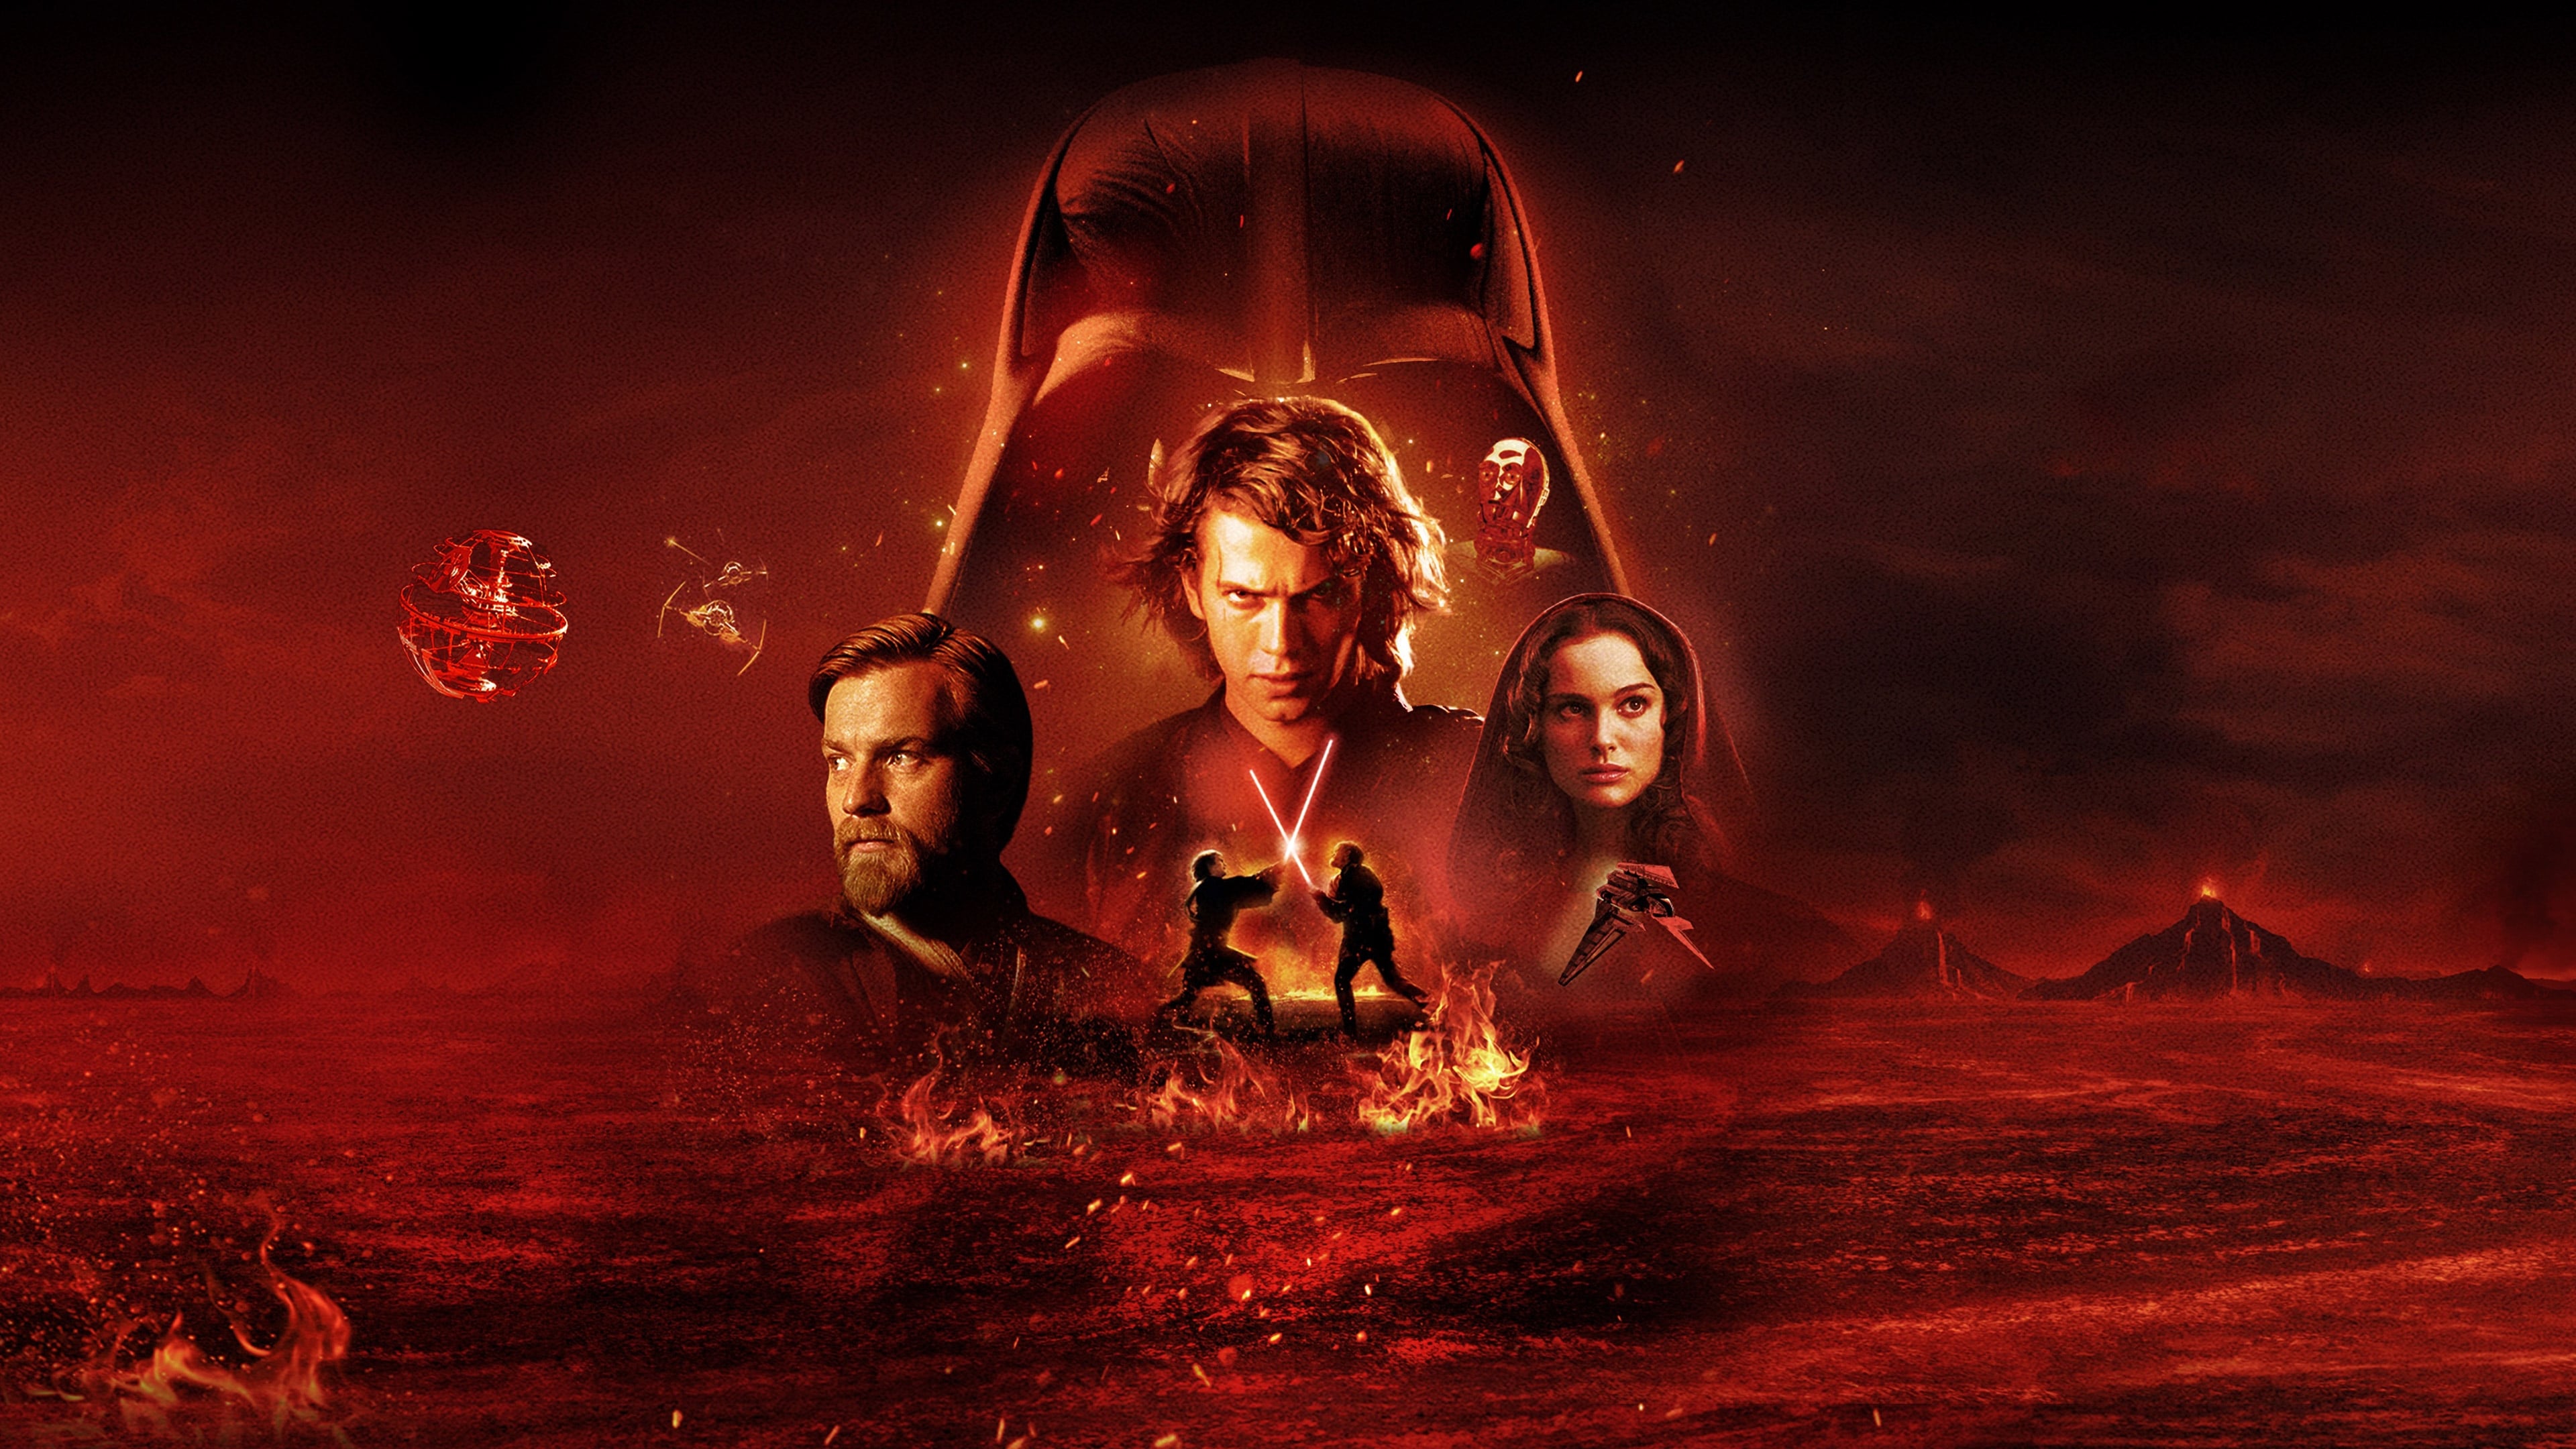 30+ Star Wars Episode III: Revenge of the Sith HD Wallpapers and Backgrounds